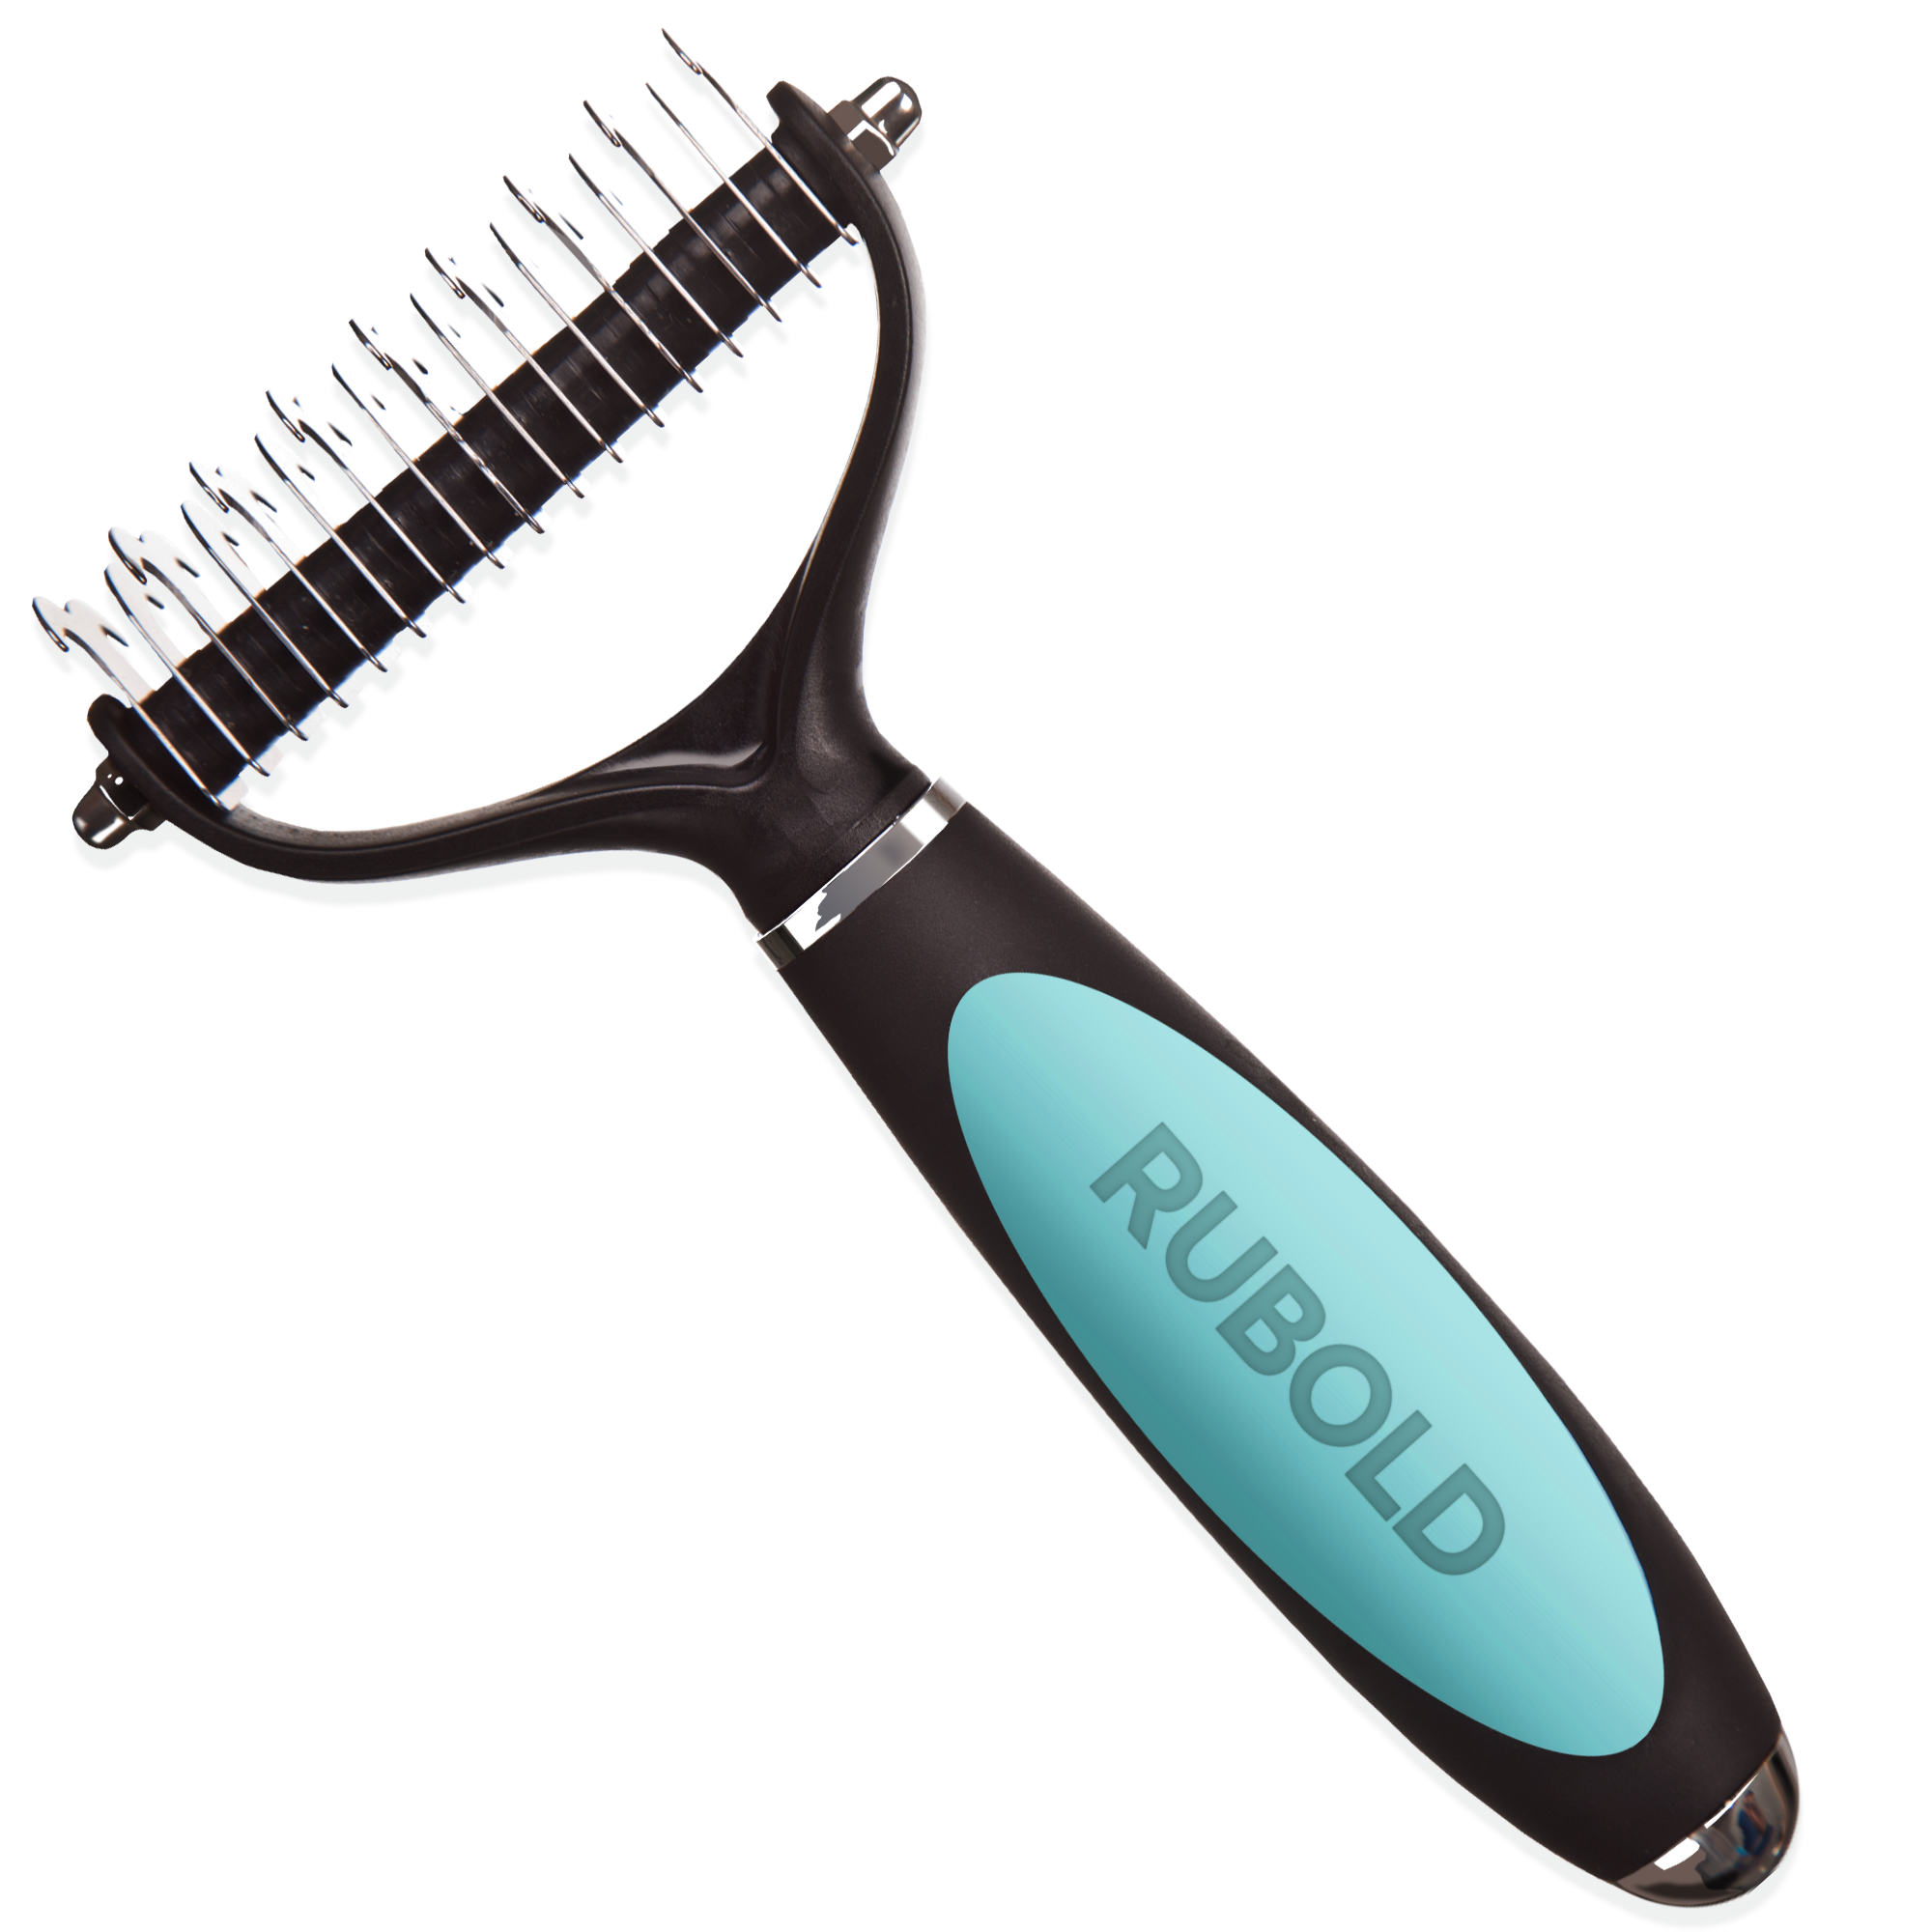 Fur Perfection Dematting Tool for Dogs - RUBOLD Dog Products for Pet Parents